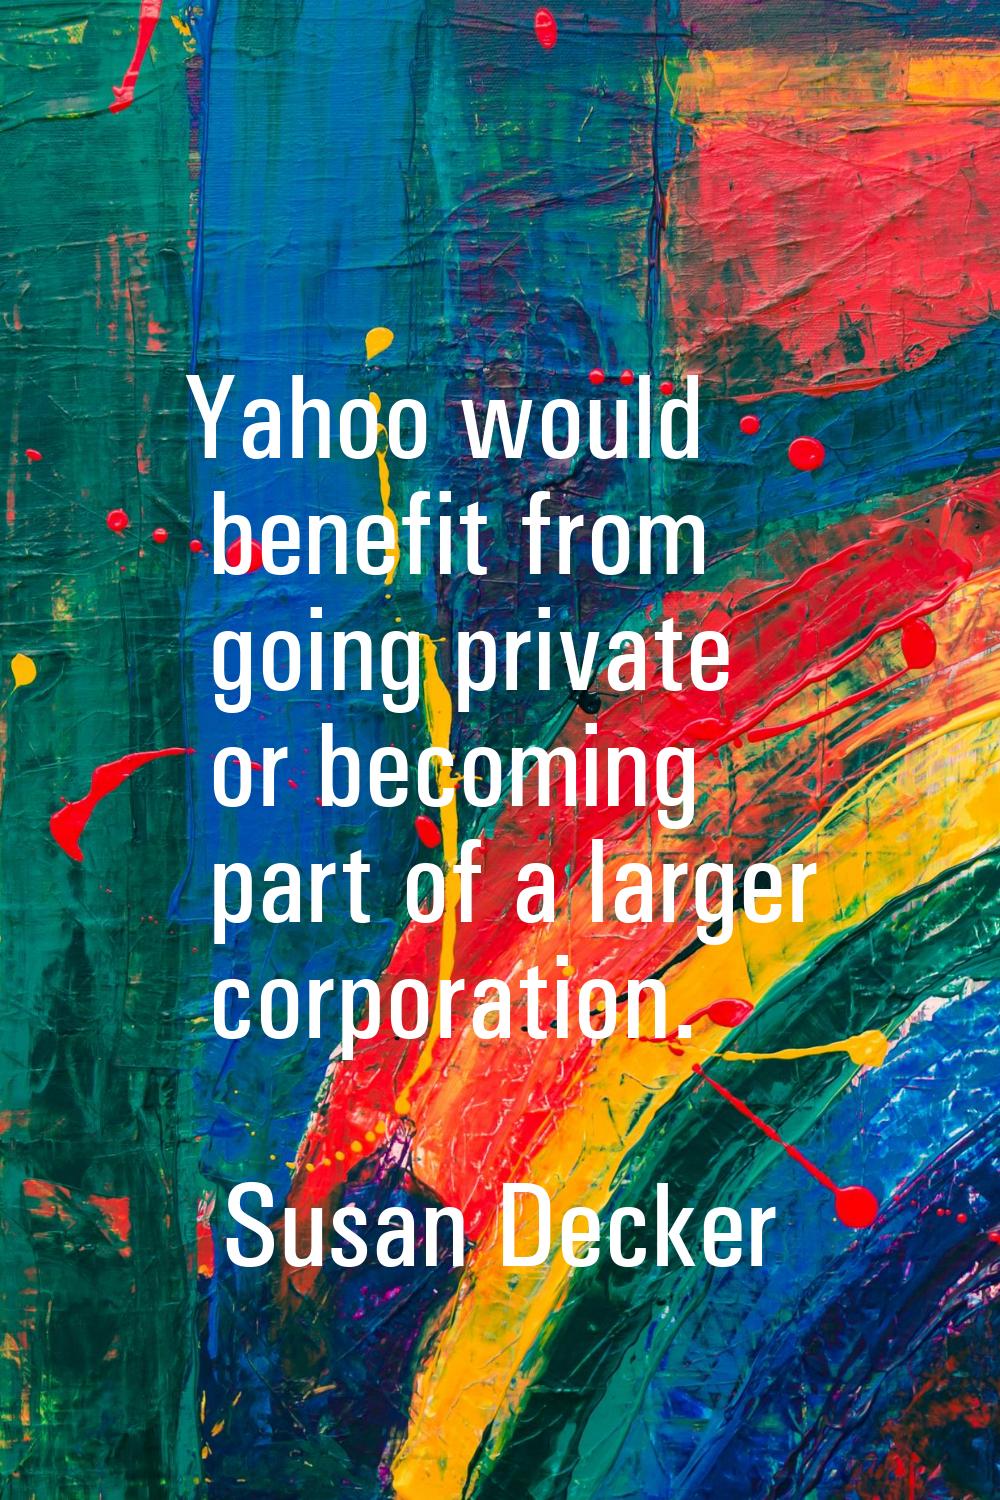 Yahoo would benefit from going private or becoming part of a larger corporation.